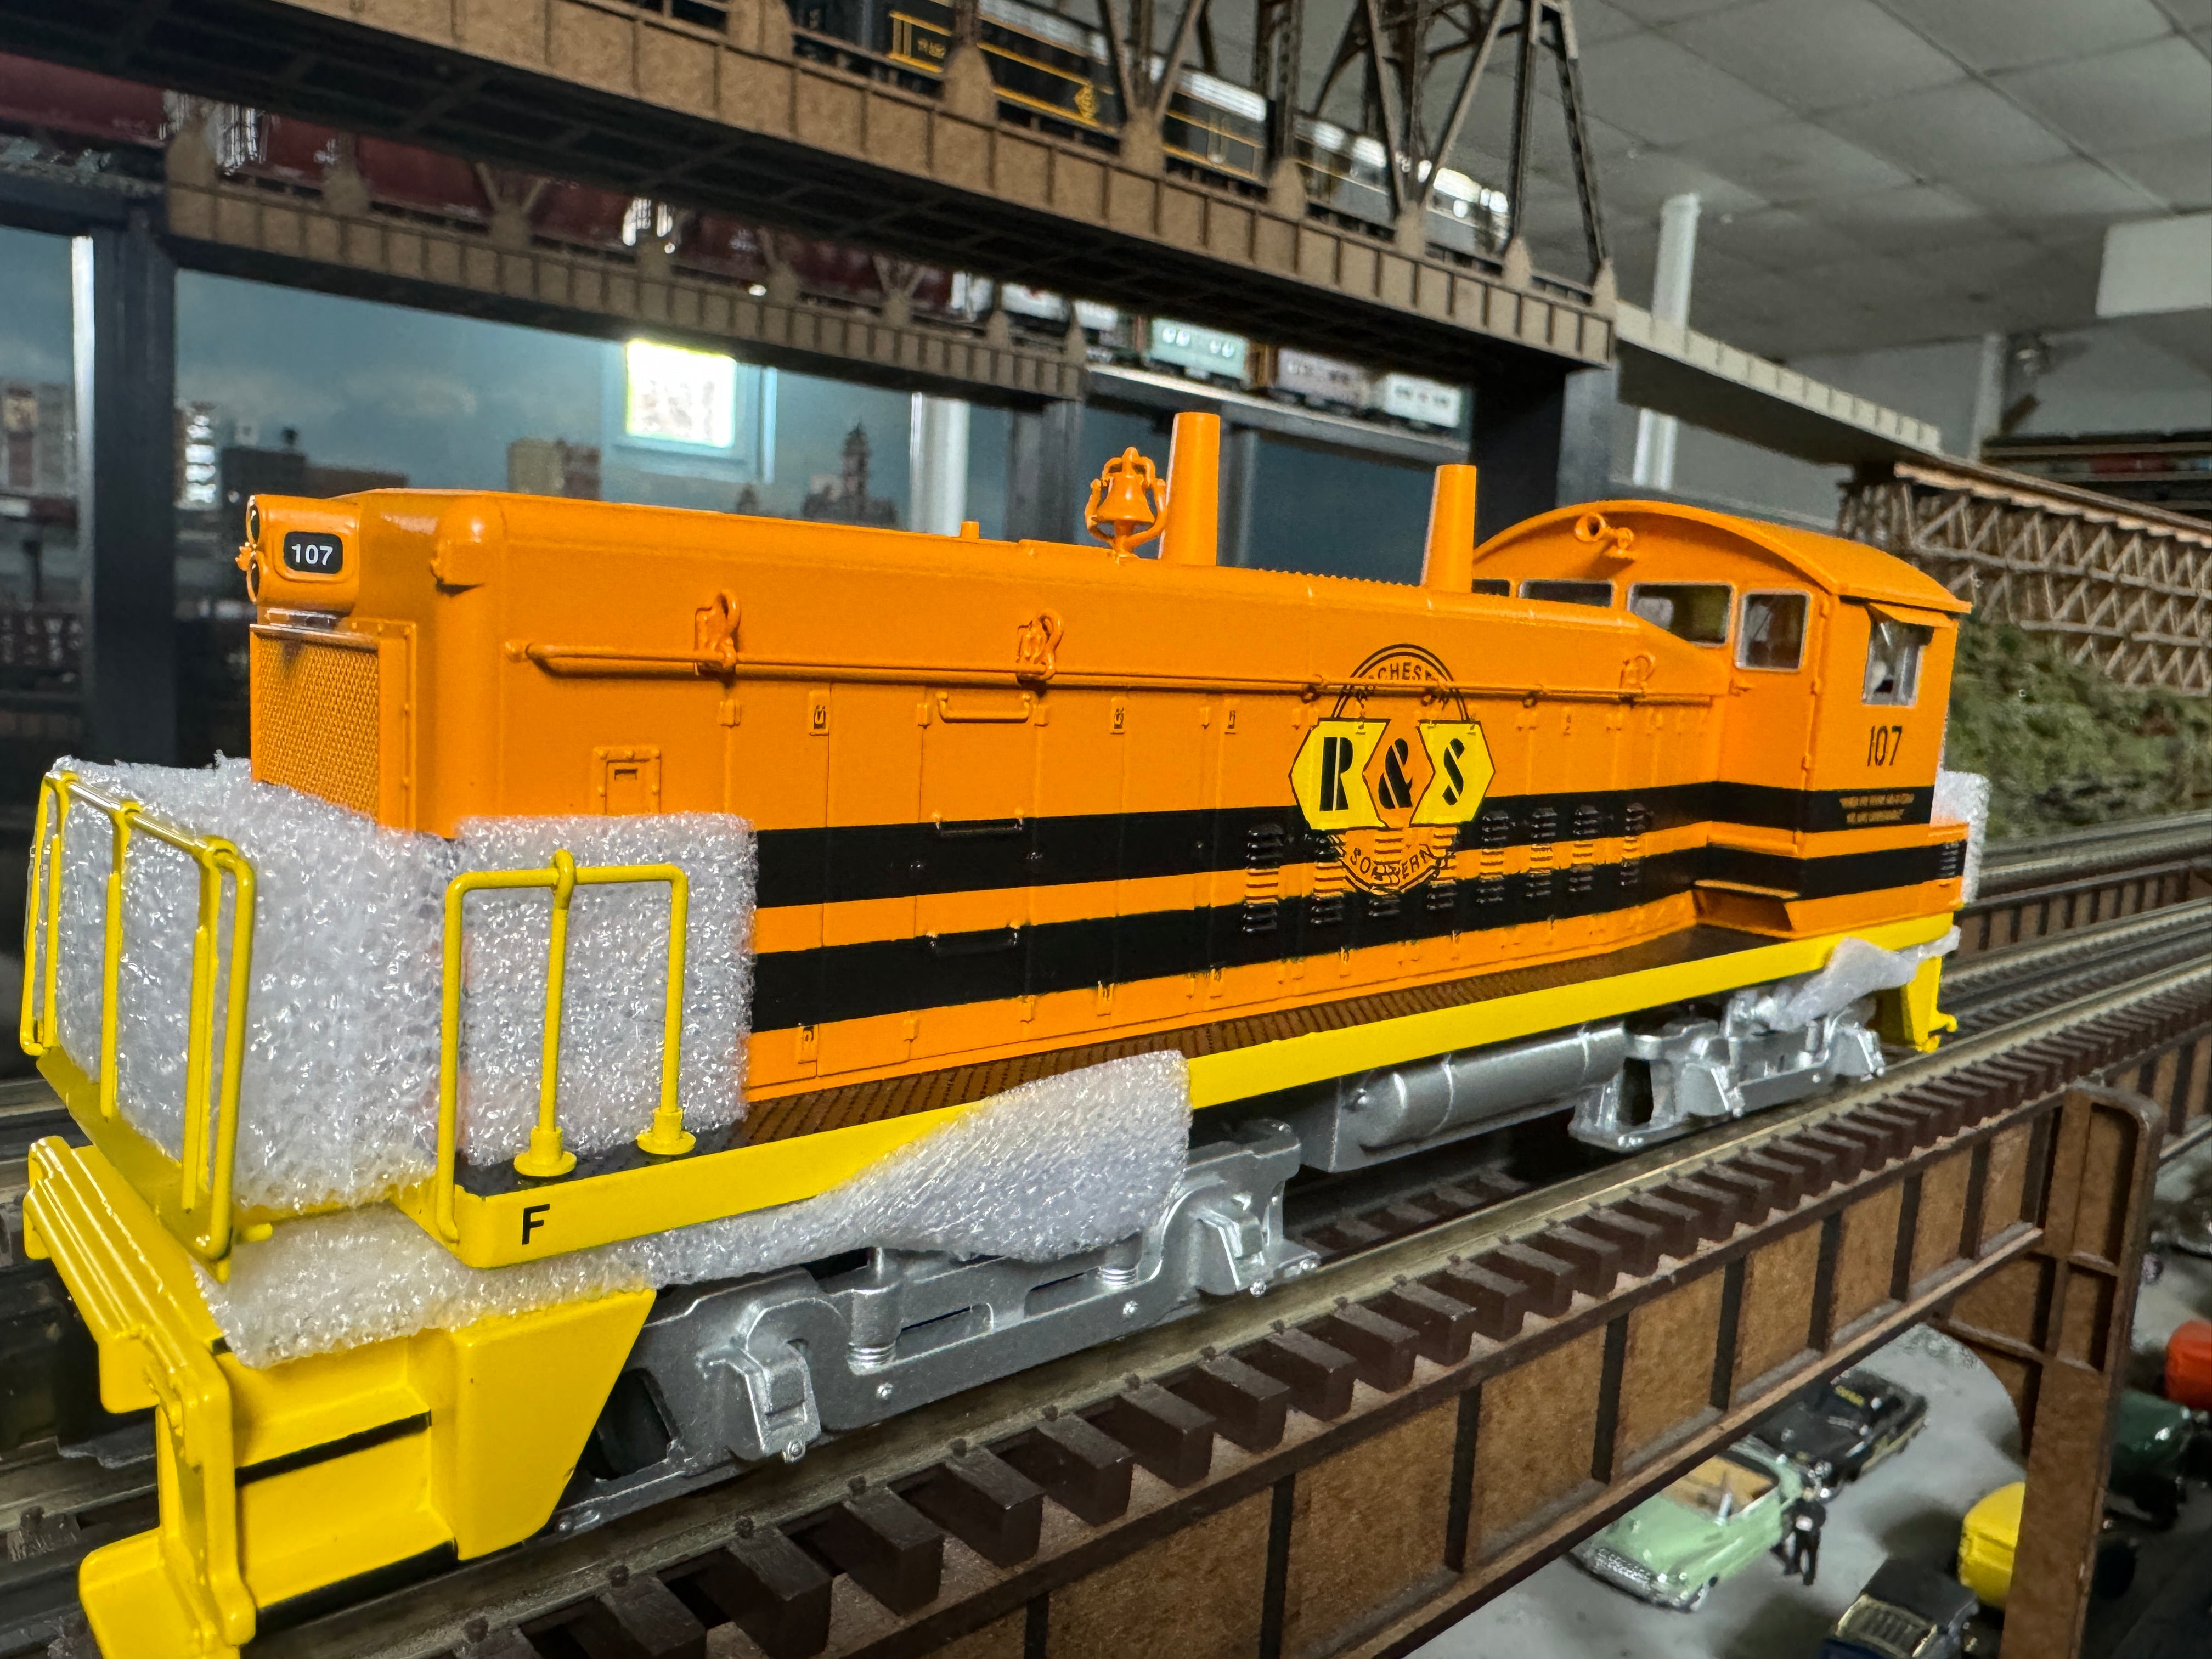 MTH 30-21091-1 - SW1200 Switcher Diesel Engine "Rochester & Southern" #107 w/ PS3 - Custom Run for E-Z Catch